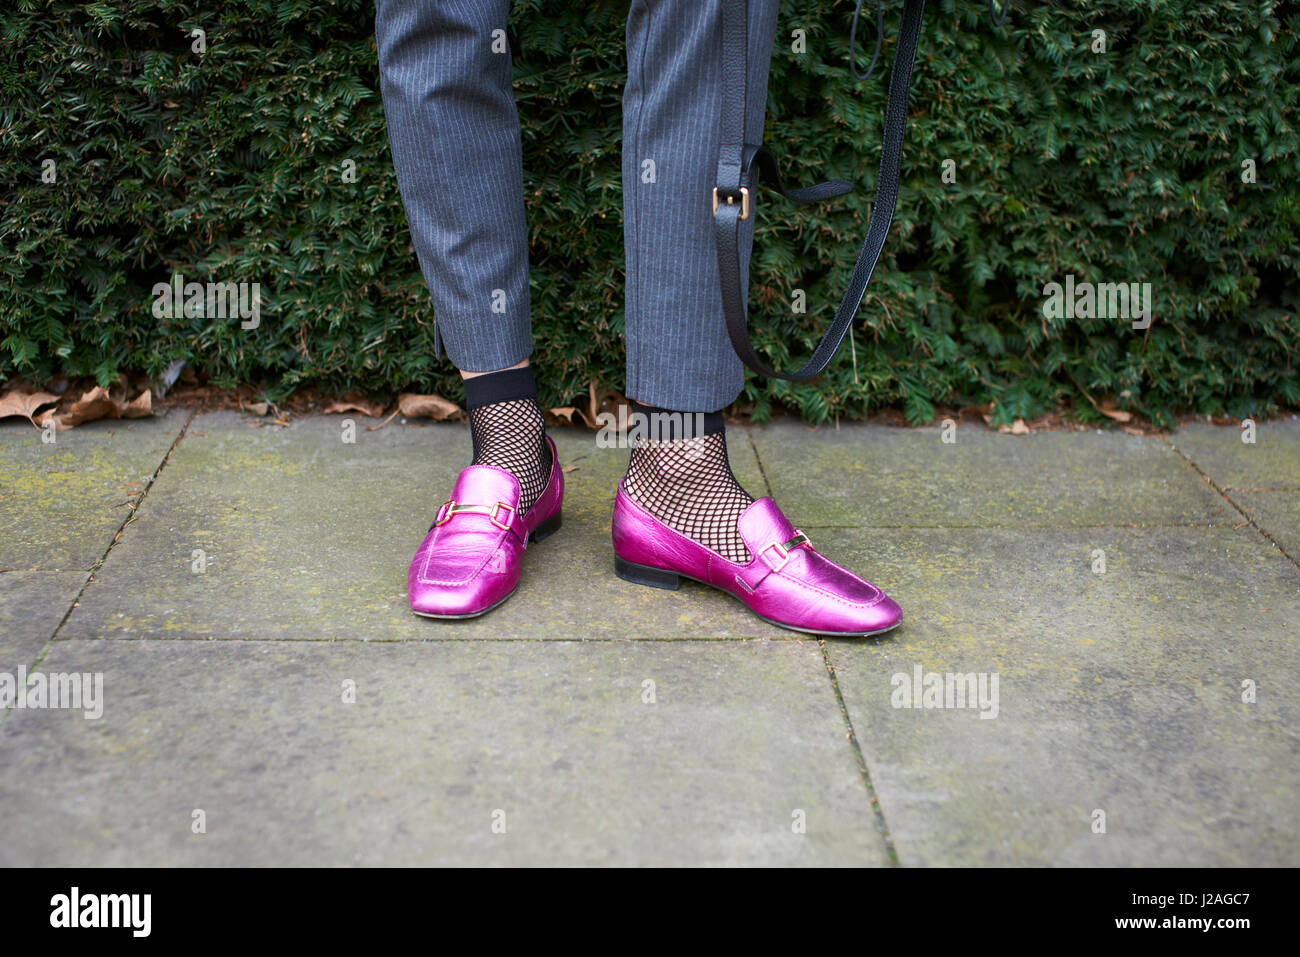 LONDON - FEBRUARY, 2017: Low section detail of woman standing in street wearing metallic pink loafer shoes, fishnet socks and trousers during London Fashion Week, horizontal Stock Photo